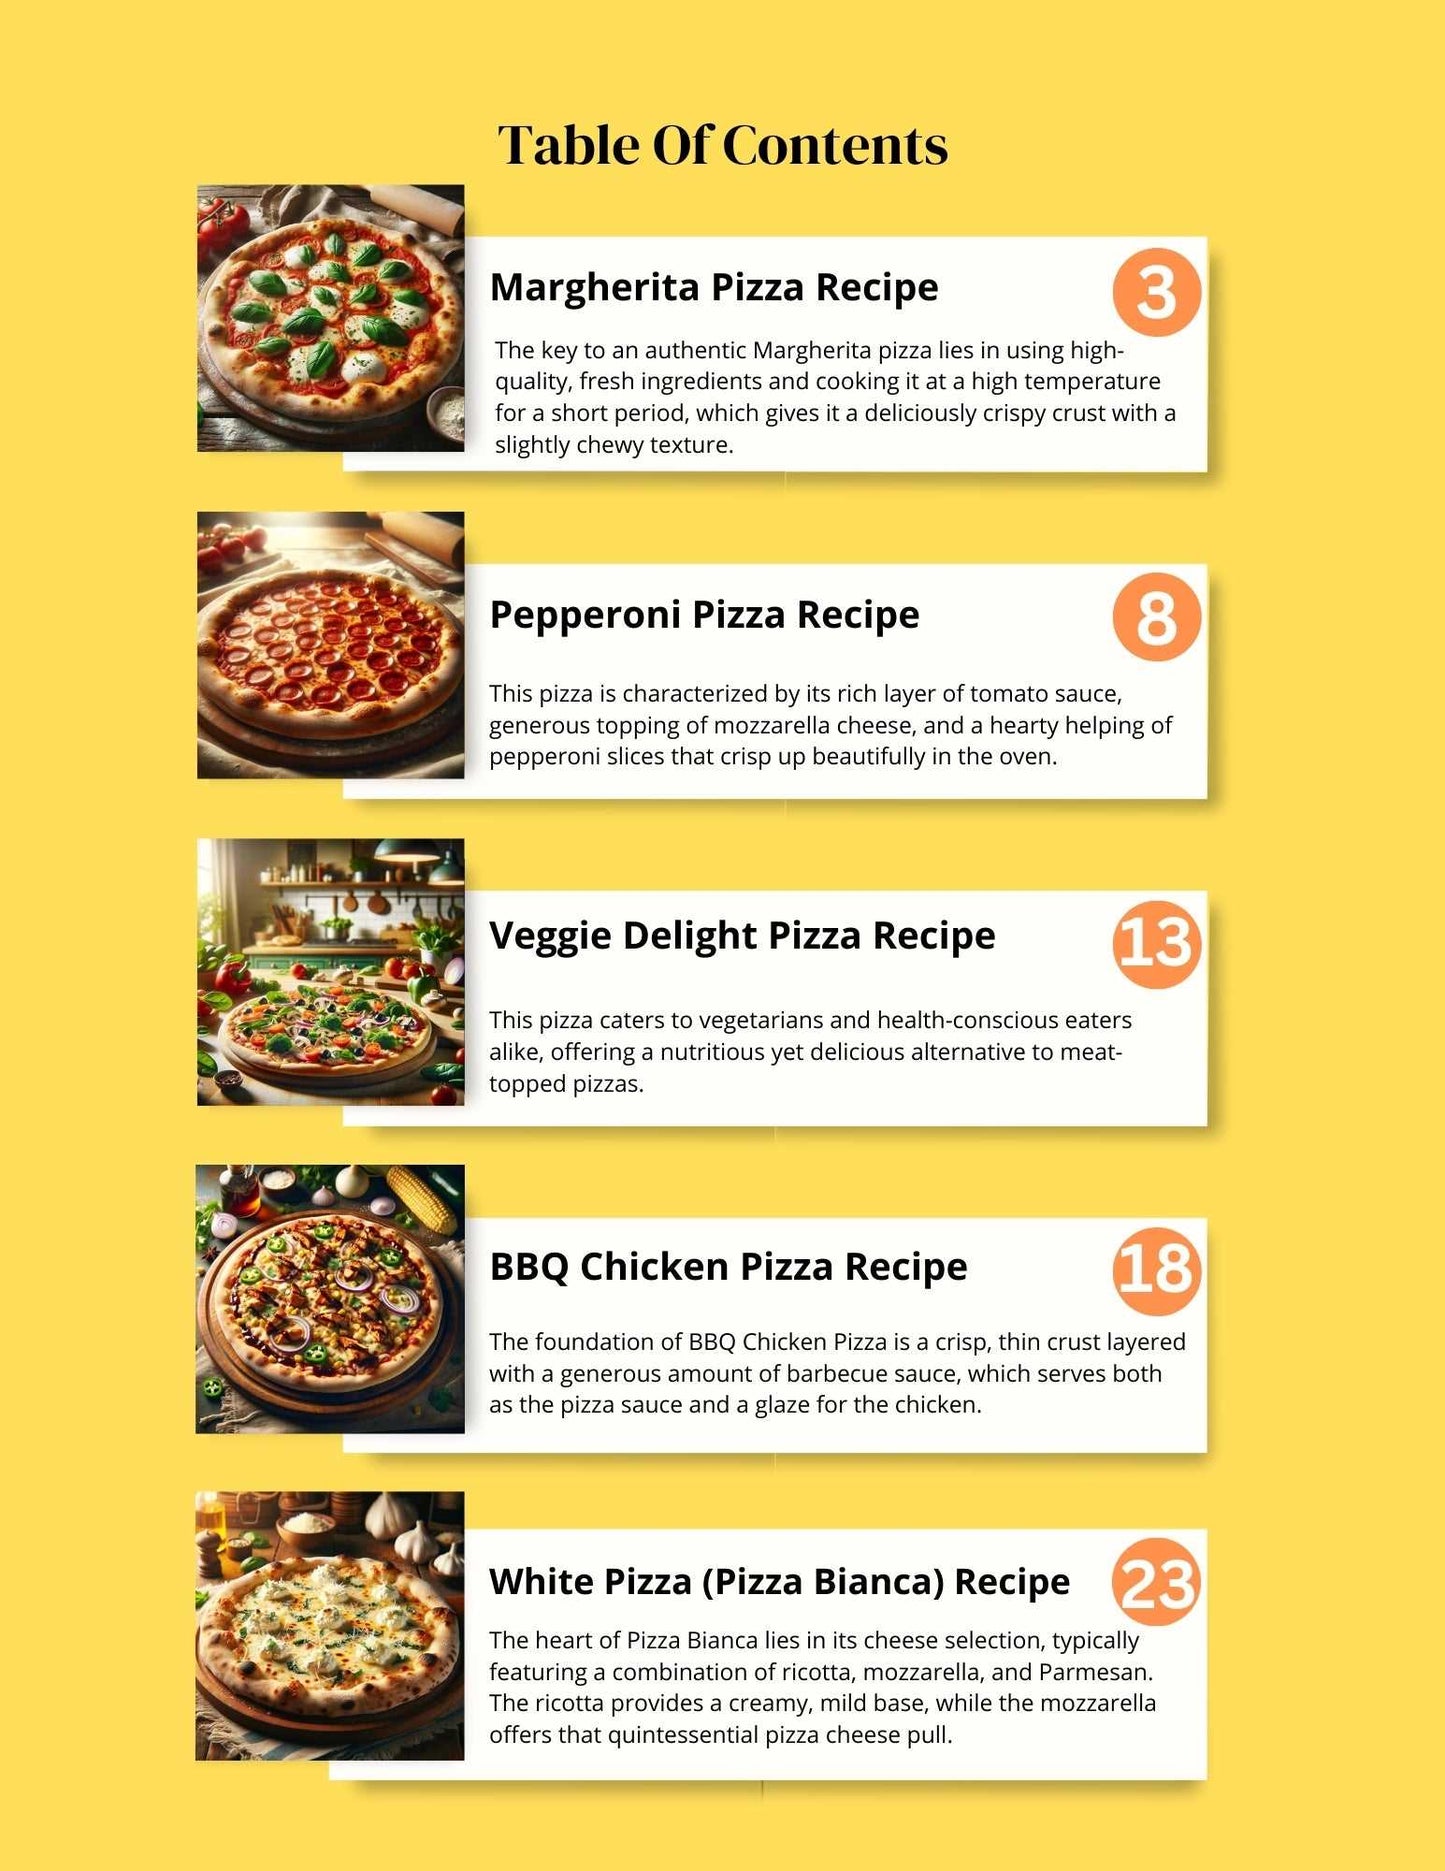 5 Flavors Of Bliss: Classic and Creative Pizza Recipes - BeinCart